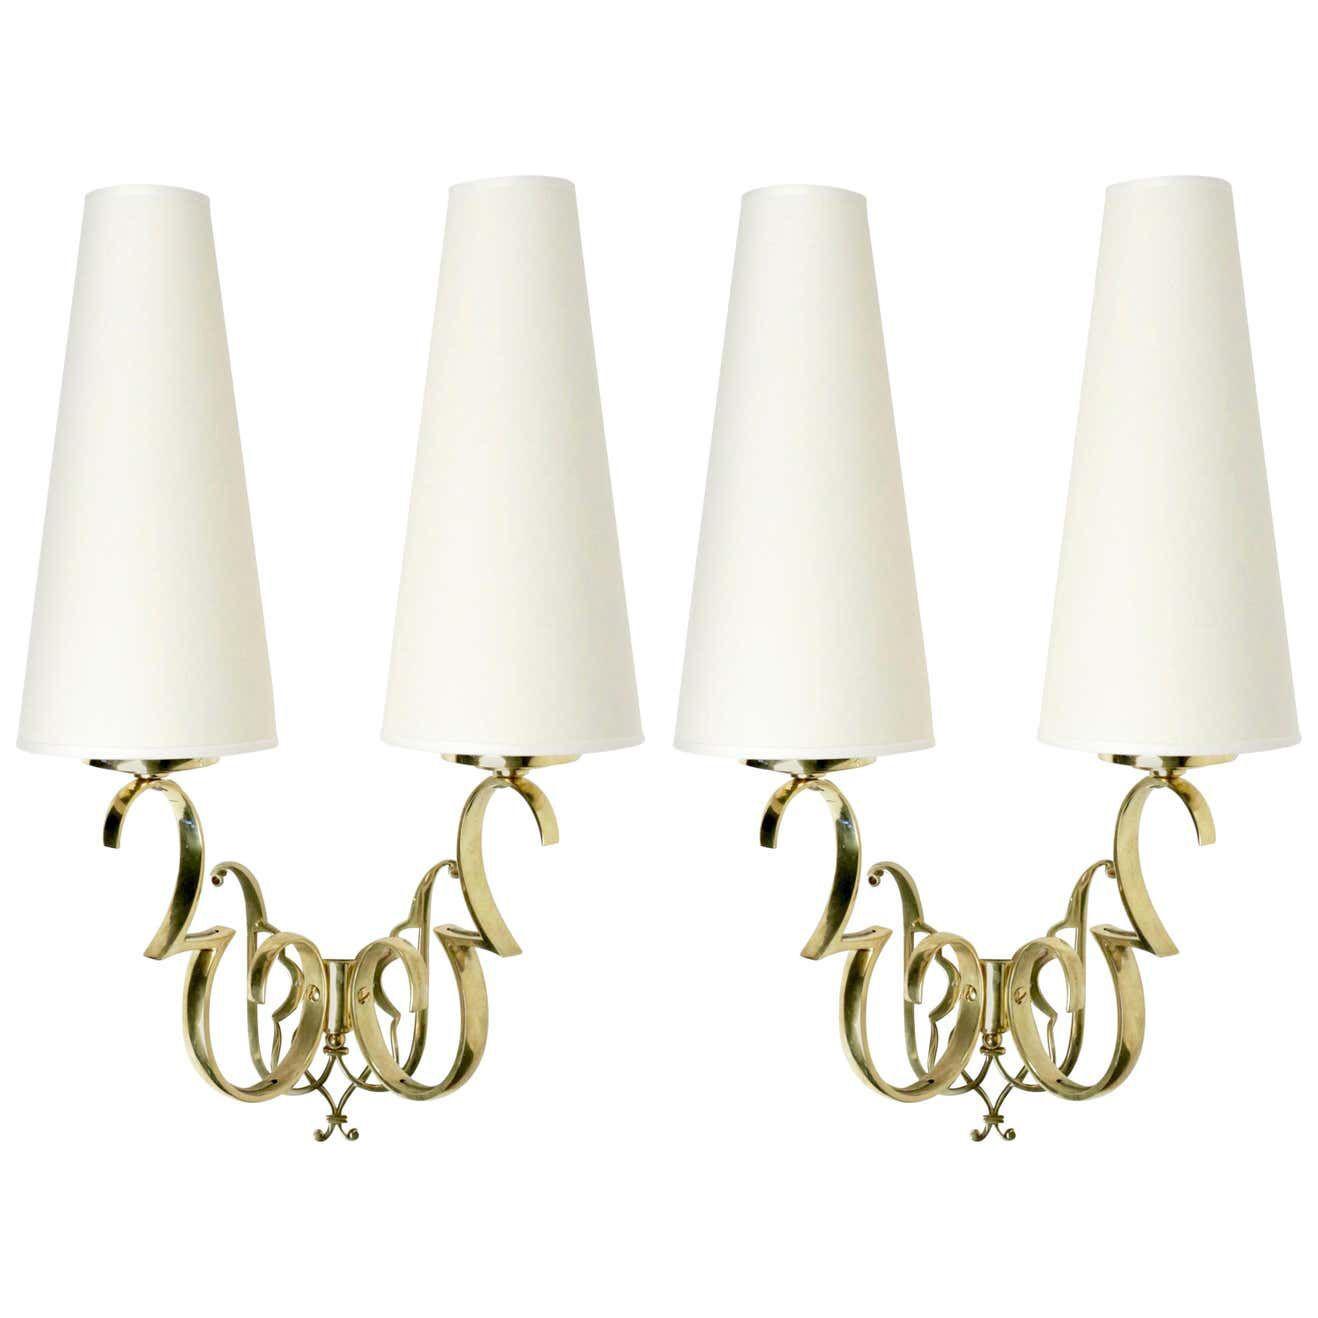 1970s Large Pair of Wall Lights in Golden Brass from Maison Roche